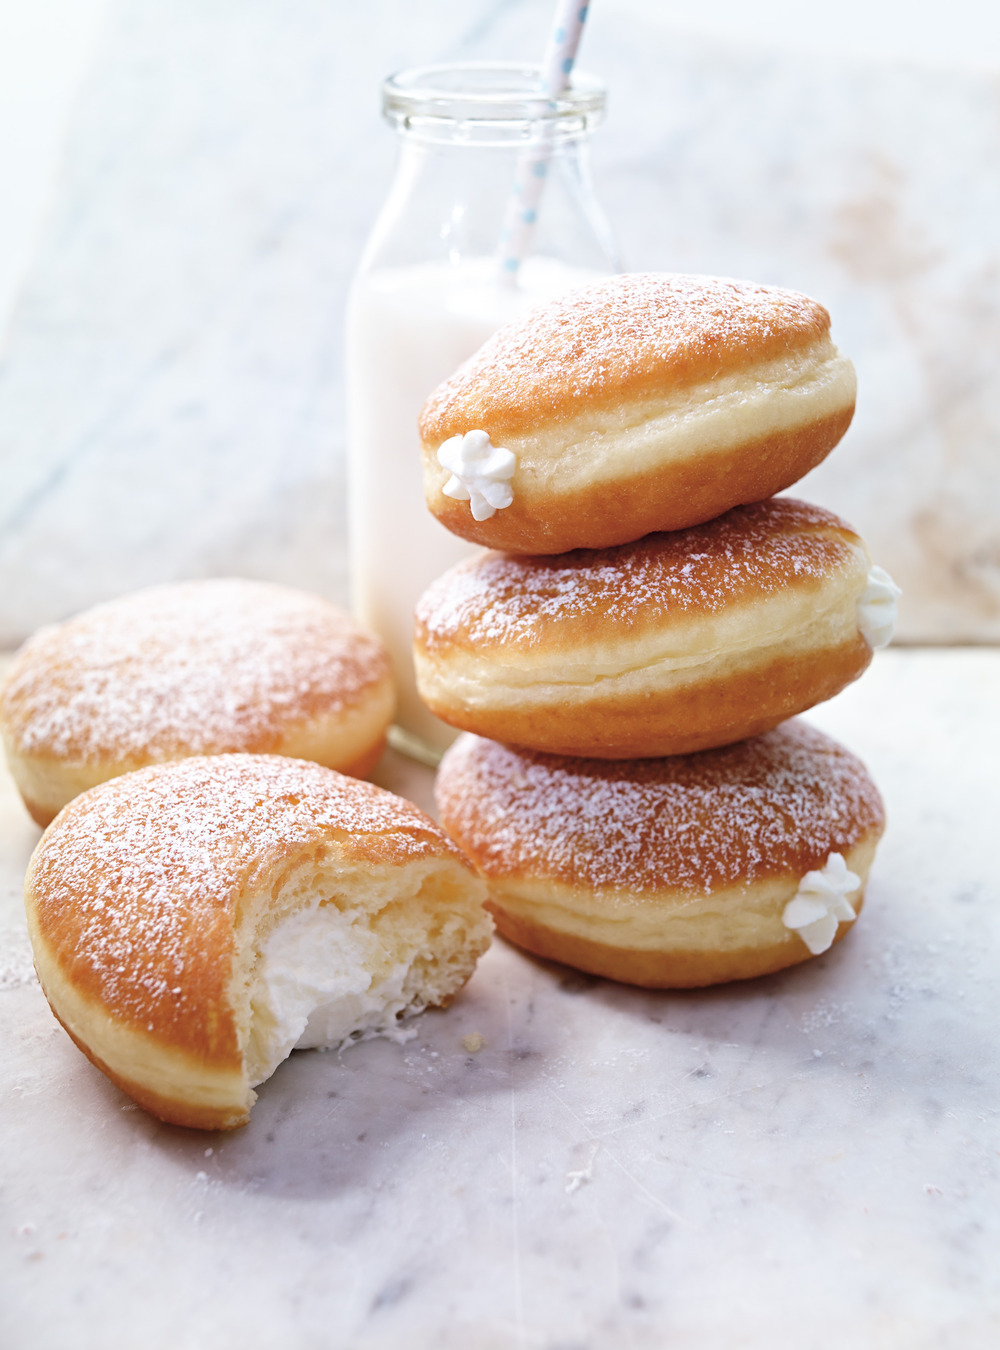 Whipped Cream-Filled Doughnuts